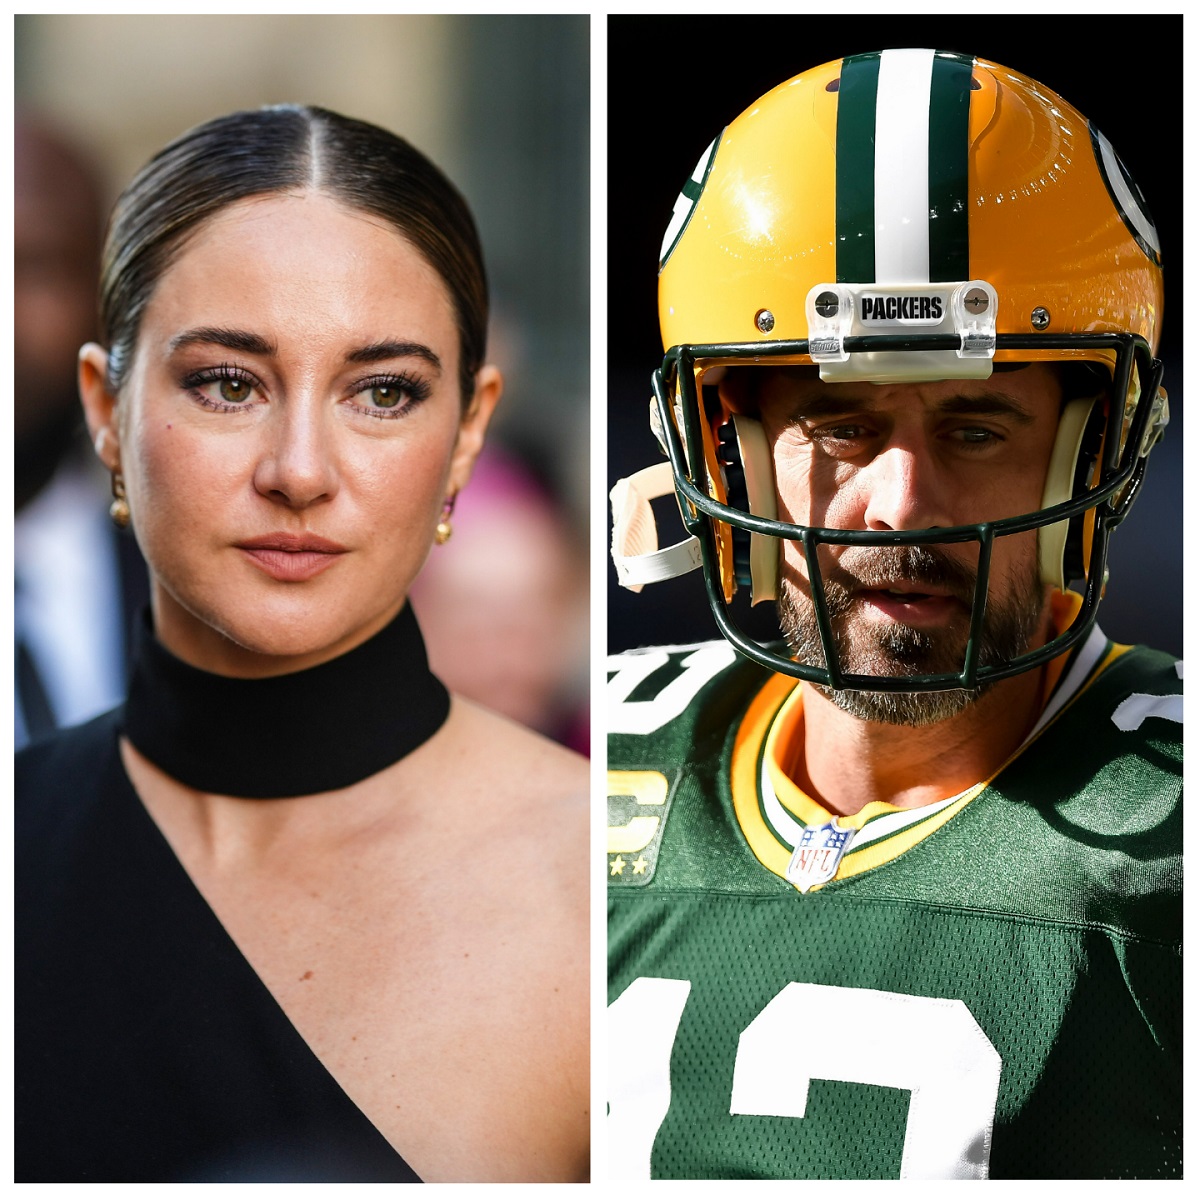 Aaron Rodgers’ New Girlfriend’s Behavior Appears to Have Angered His Ex Shailene Woodley